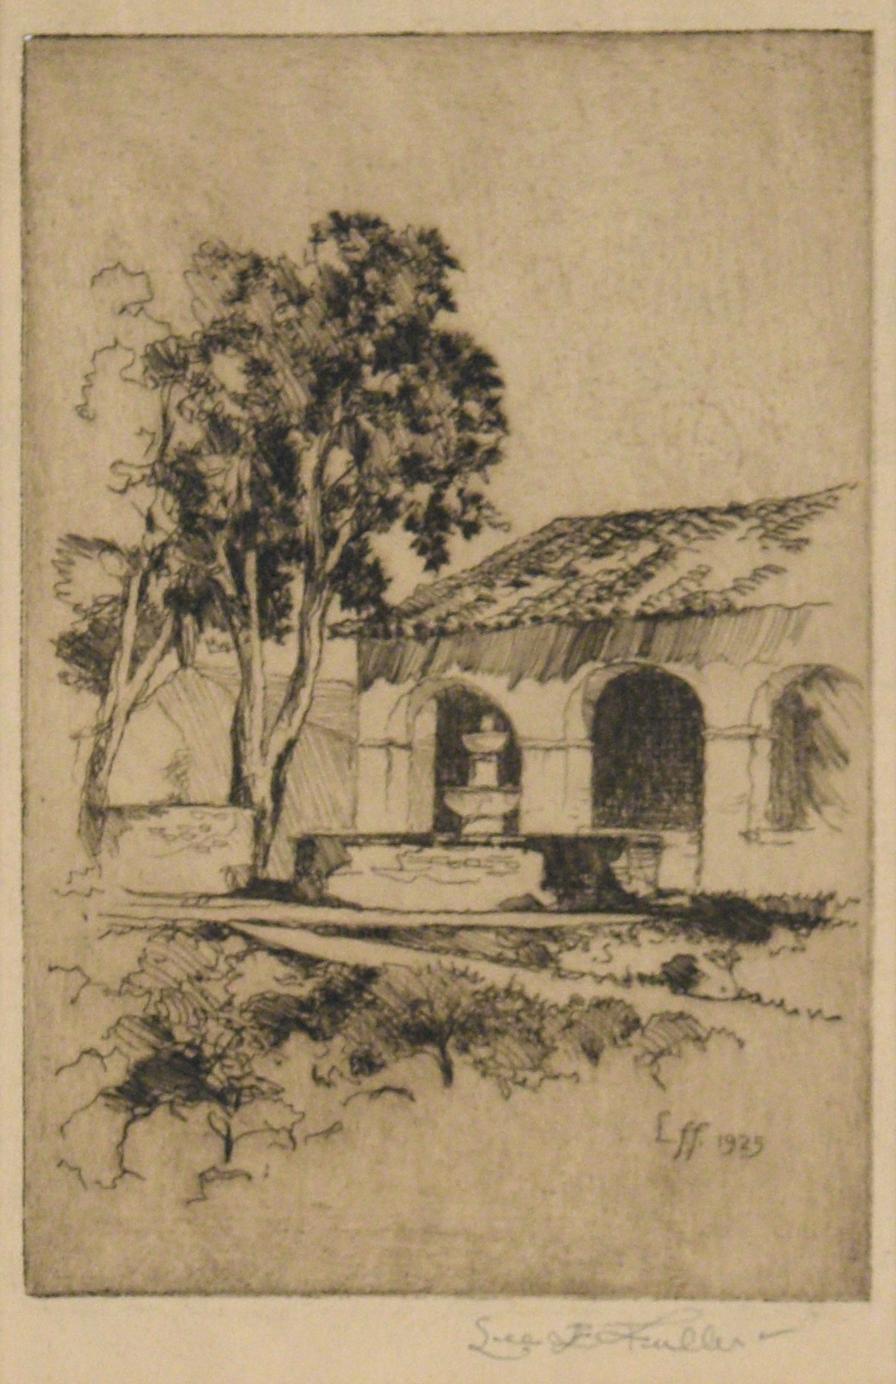 Palm Springs Courtyard with Fountain - Drypoint Etching on Paper - Print by Leland Fuller